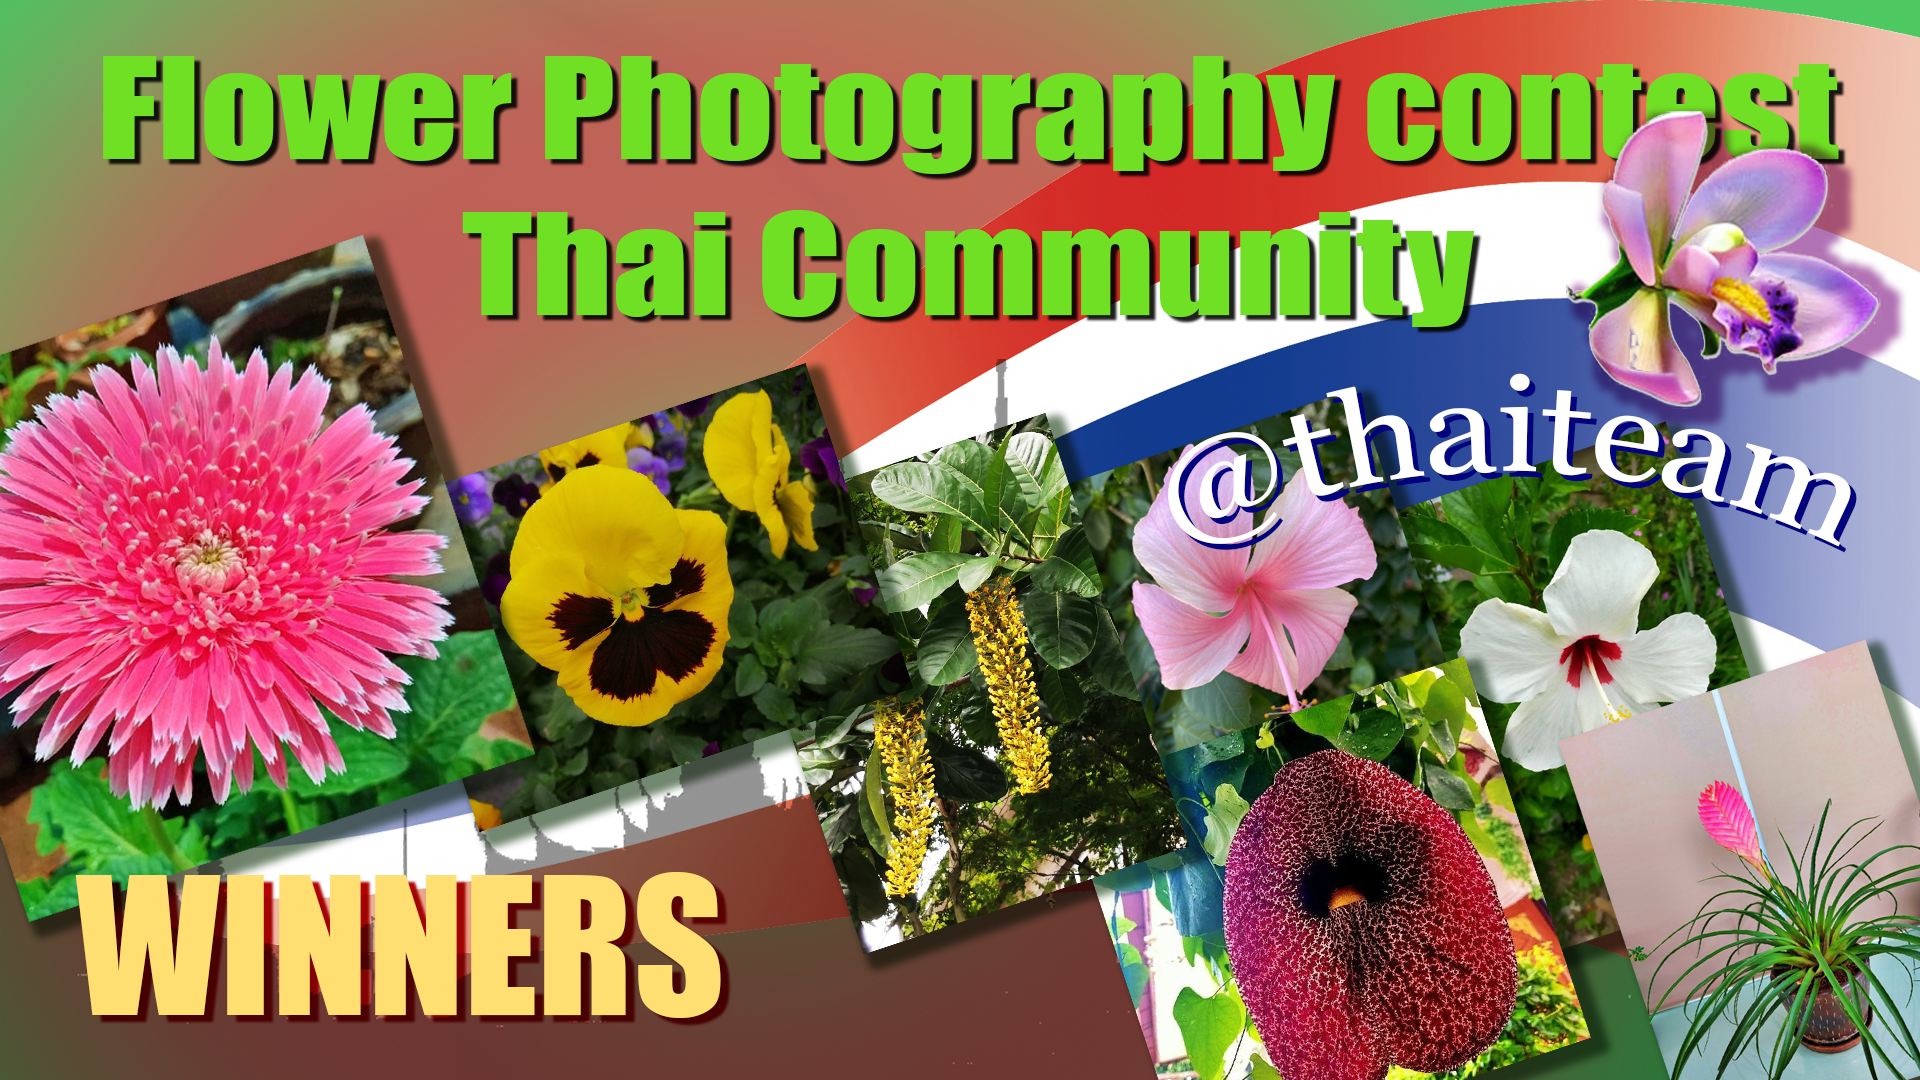 Flower Photography contest N winners.png